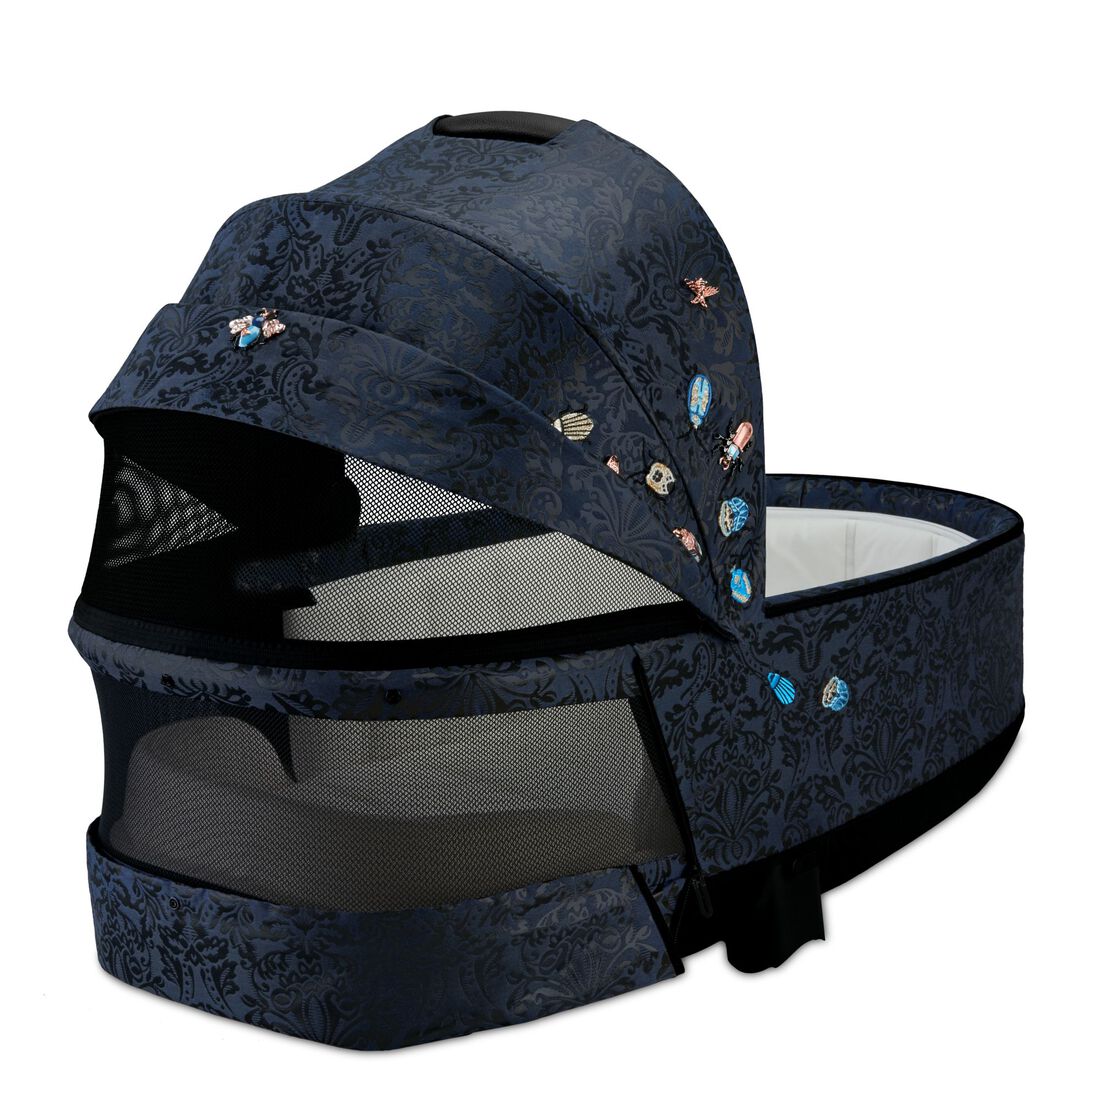 CYBEX Priam 3 Lux Carry Cot - Jewels of Nature in Jewels of Nature large image number 3